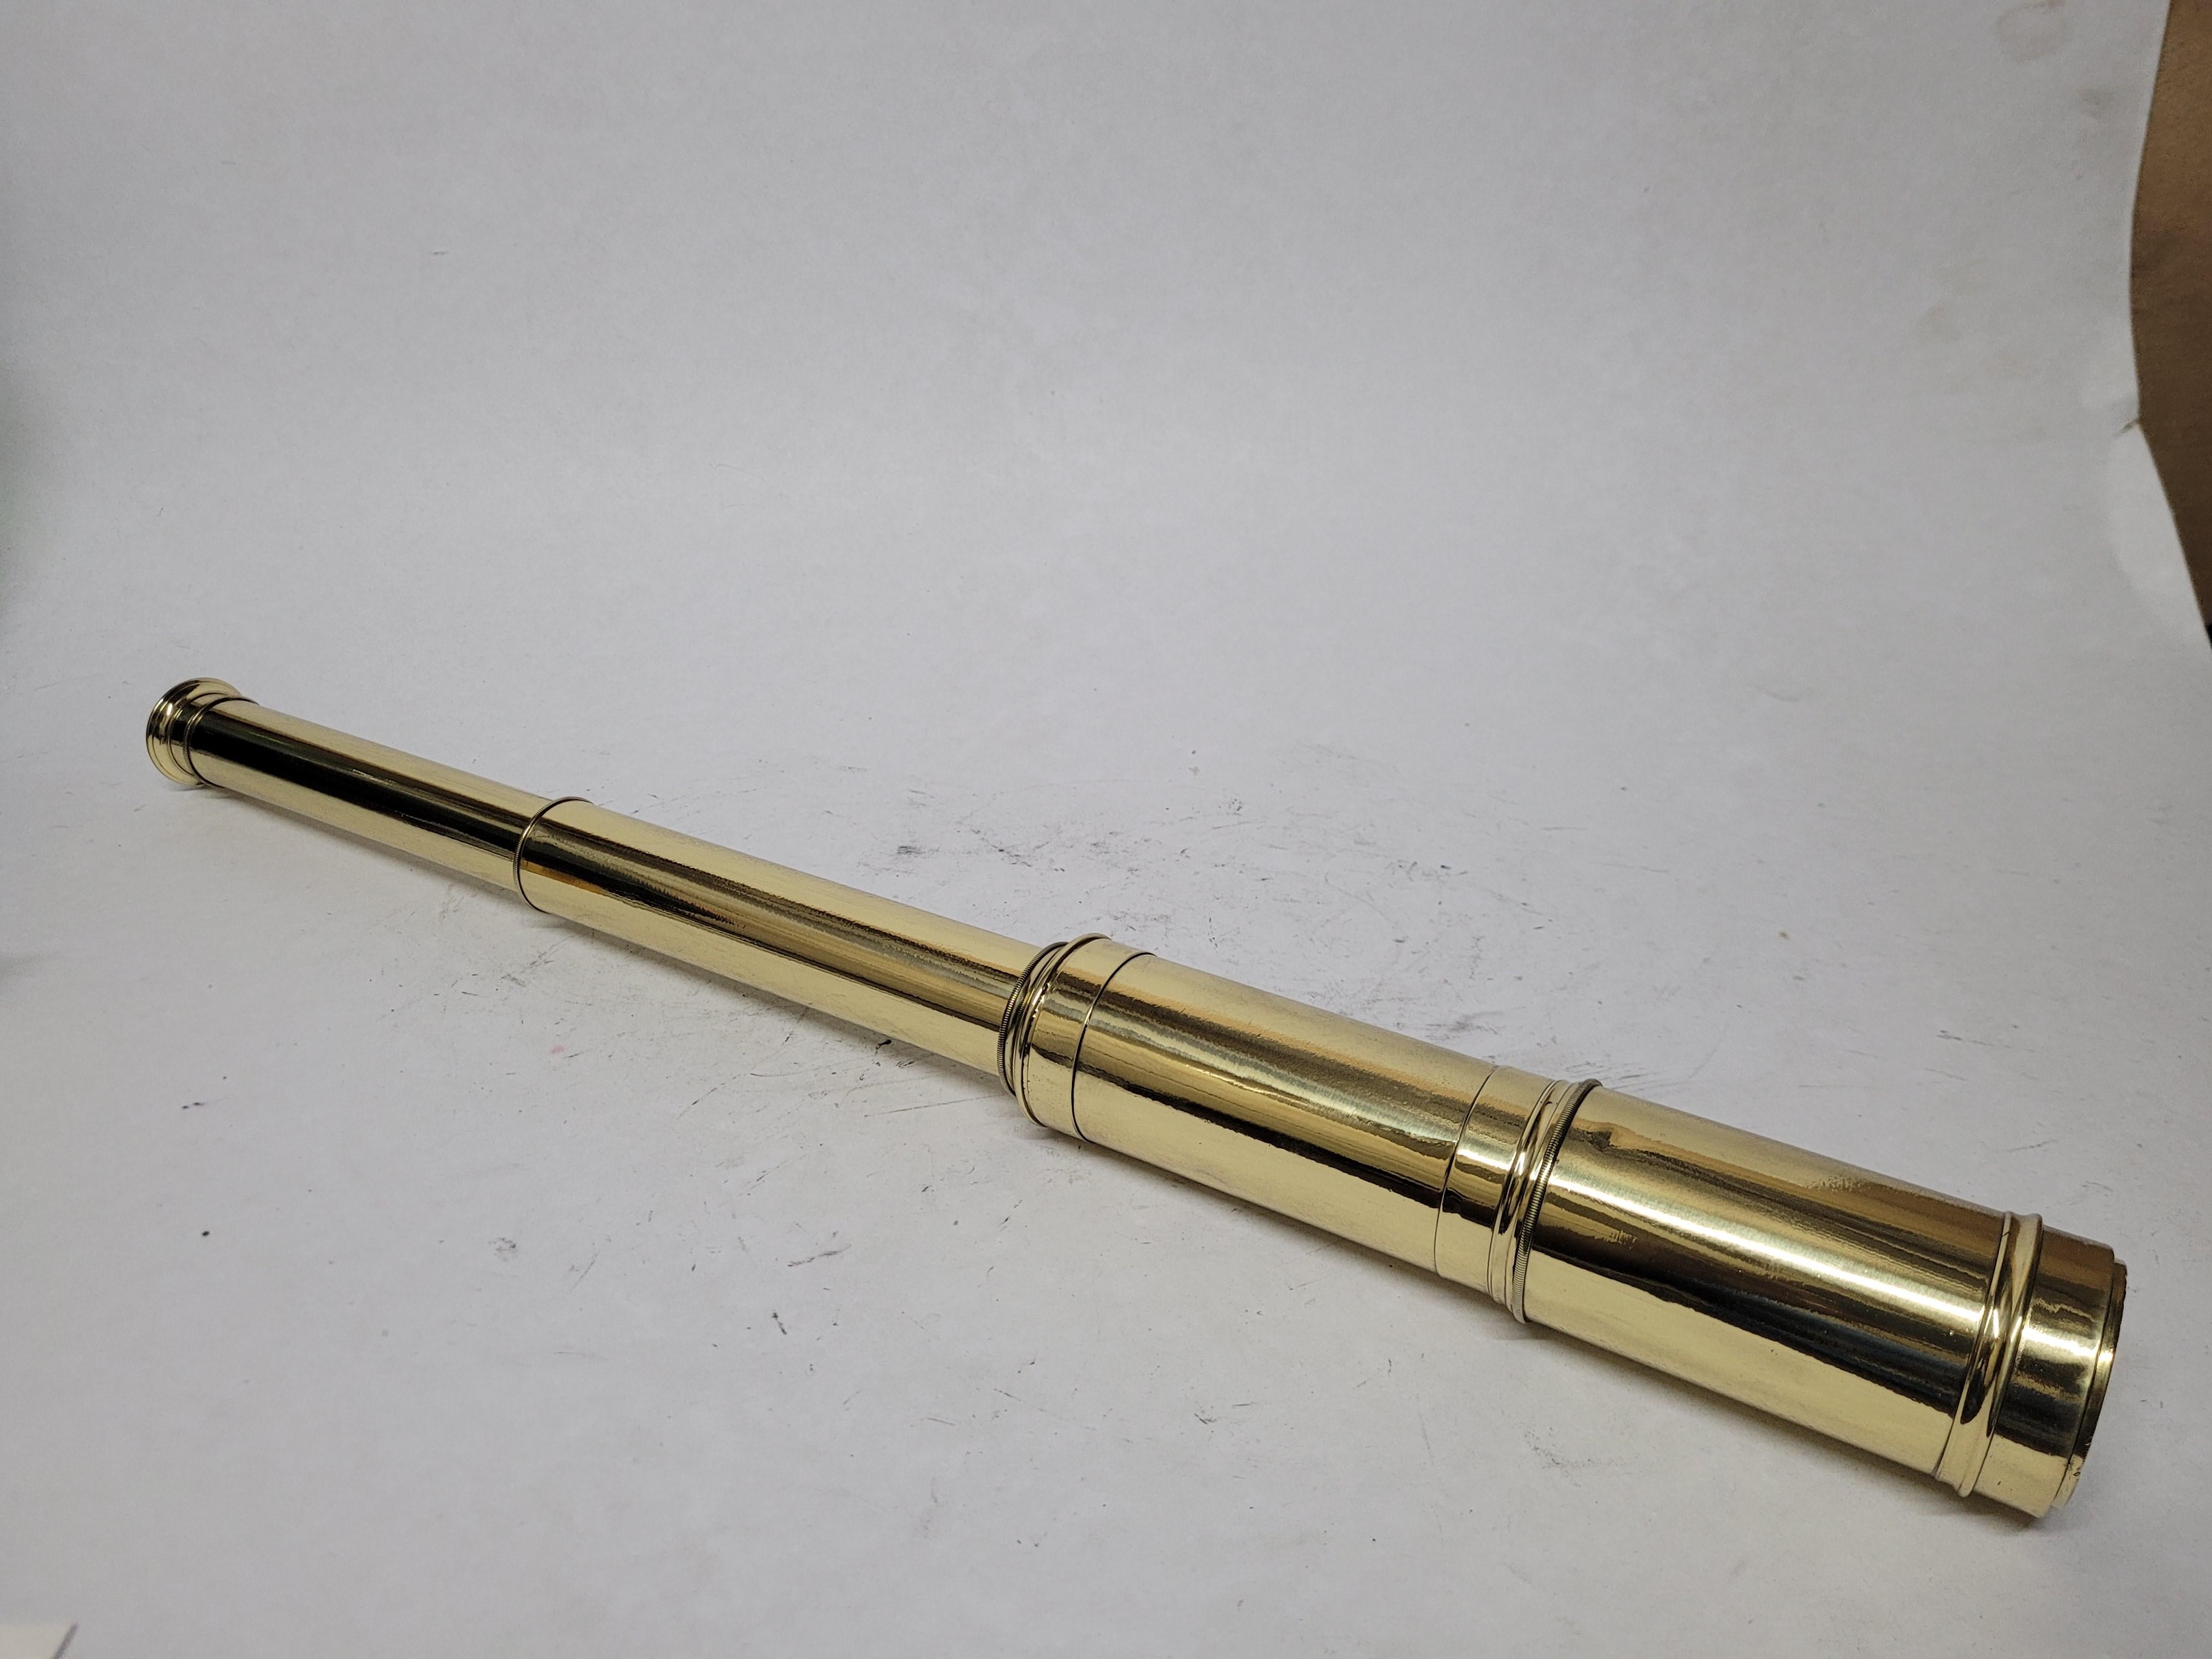 Ships spyglass telescope appropriate for use on a yacht, ship, or anywhere with a view. This has been meticulously polished and lacquered. We just restored a great collection of these. This fine instrument has a two draw barrel of solid brass. The